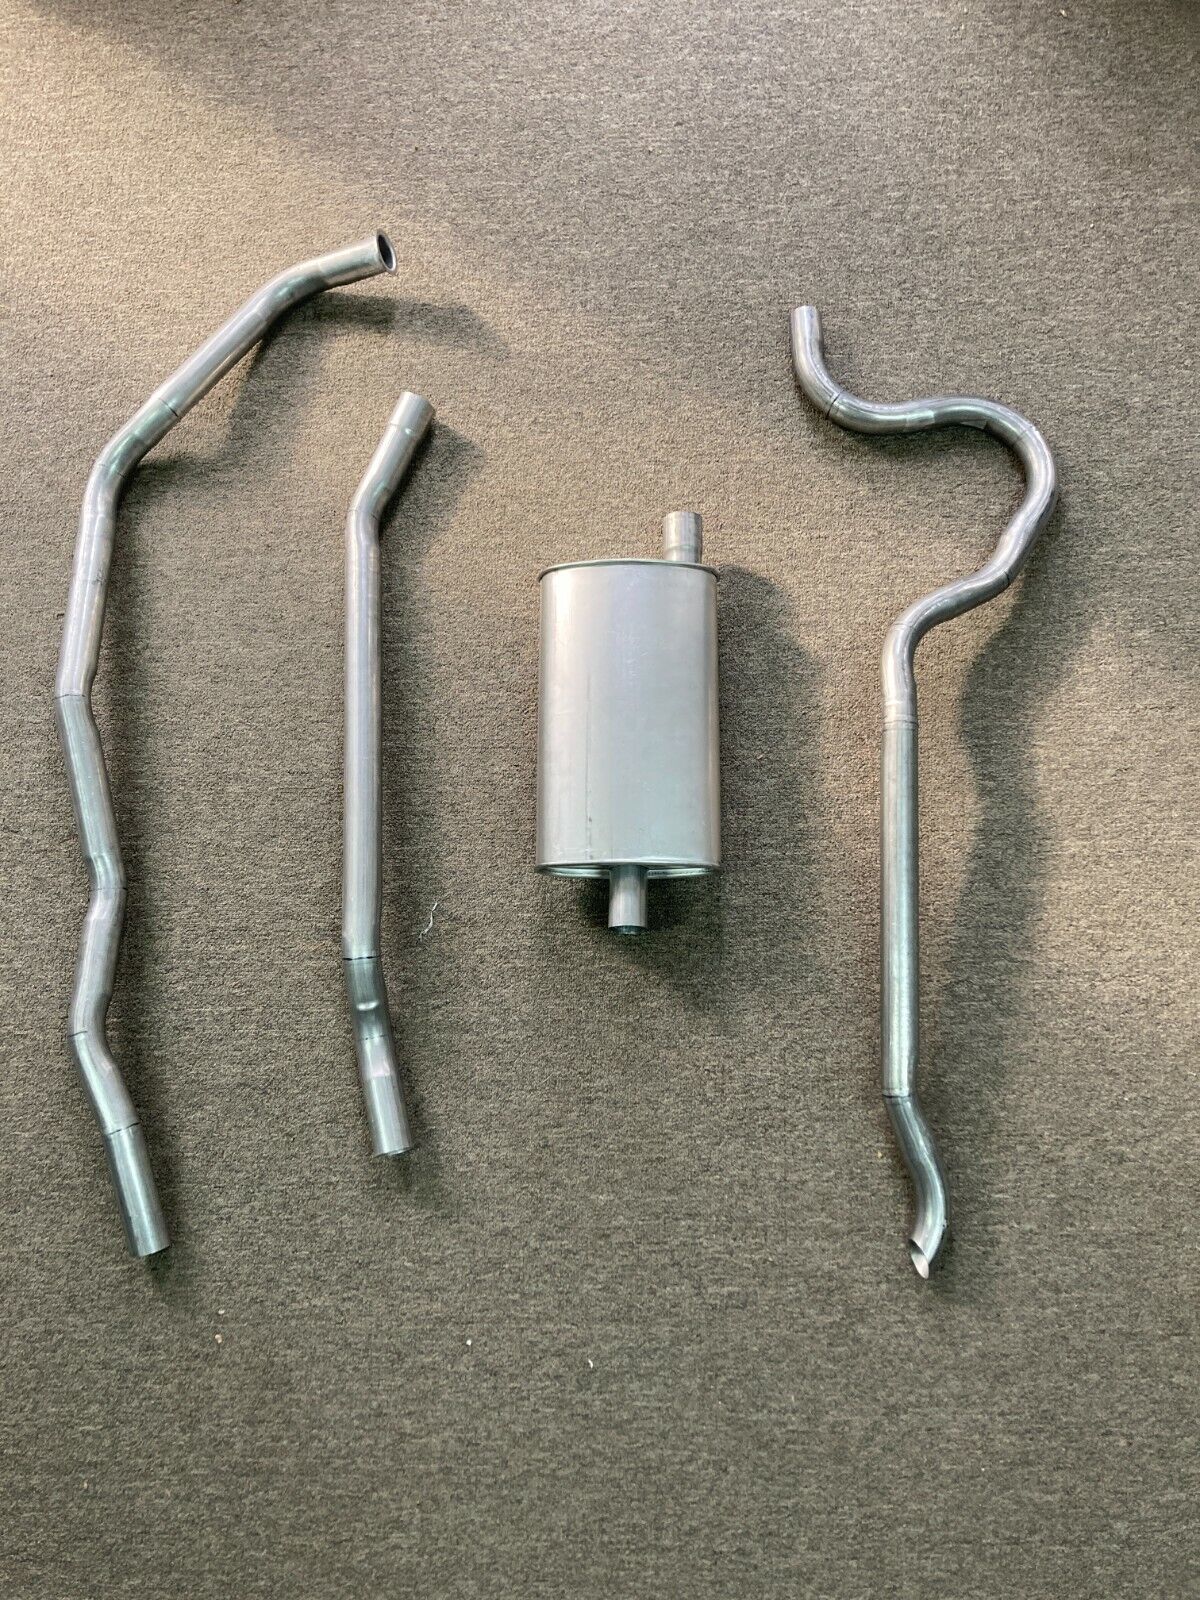 1967, 1968, 1969, 1970, 1971 Plymouth Valiant Slant 6 Cylinder Exhaust System